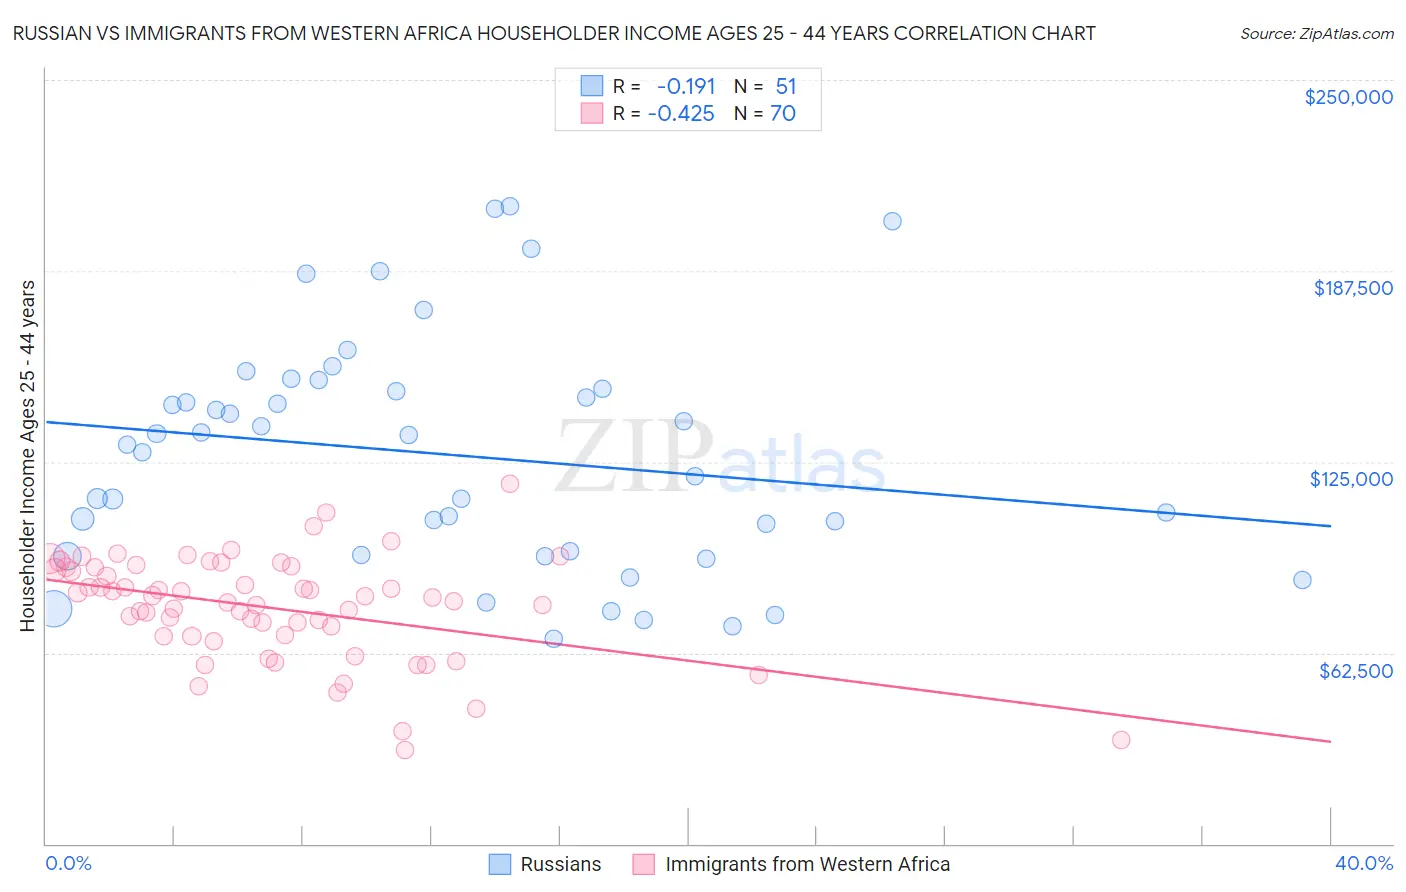 Russian vs Immigrants from Western Africa Householder Income Ages 25 - 44 years